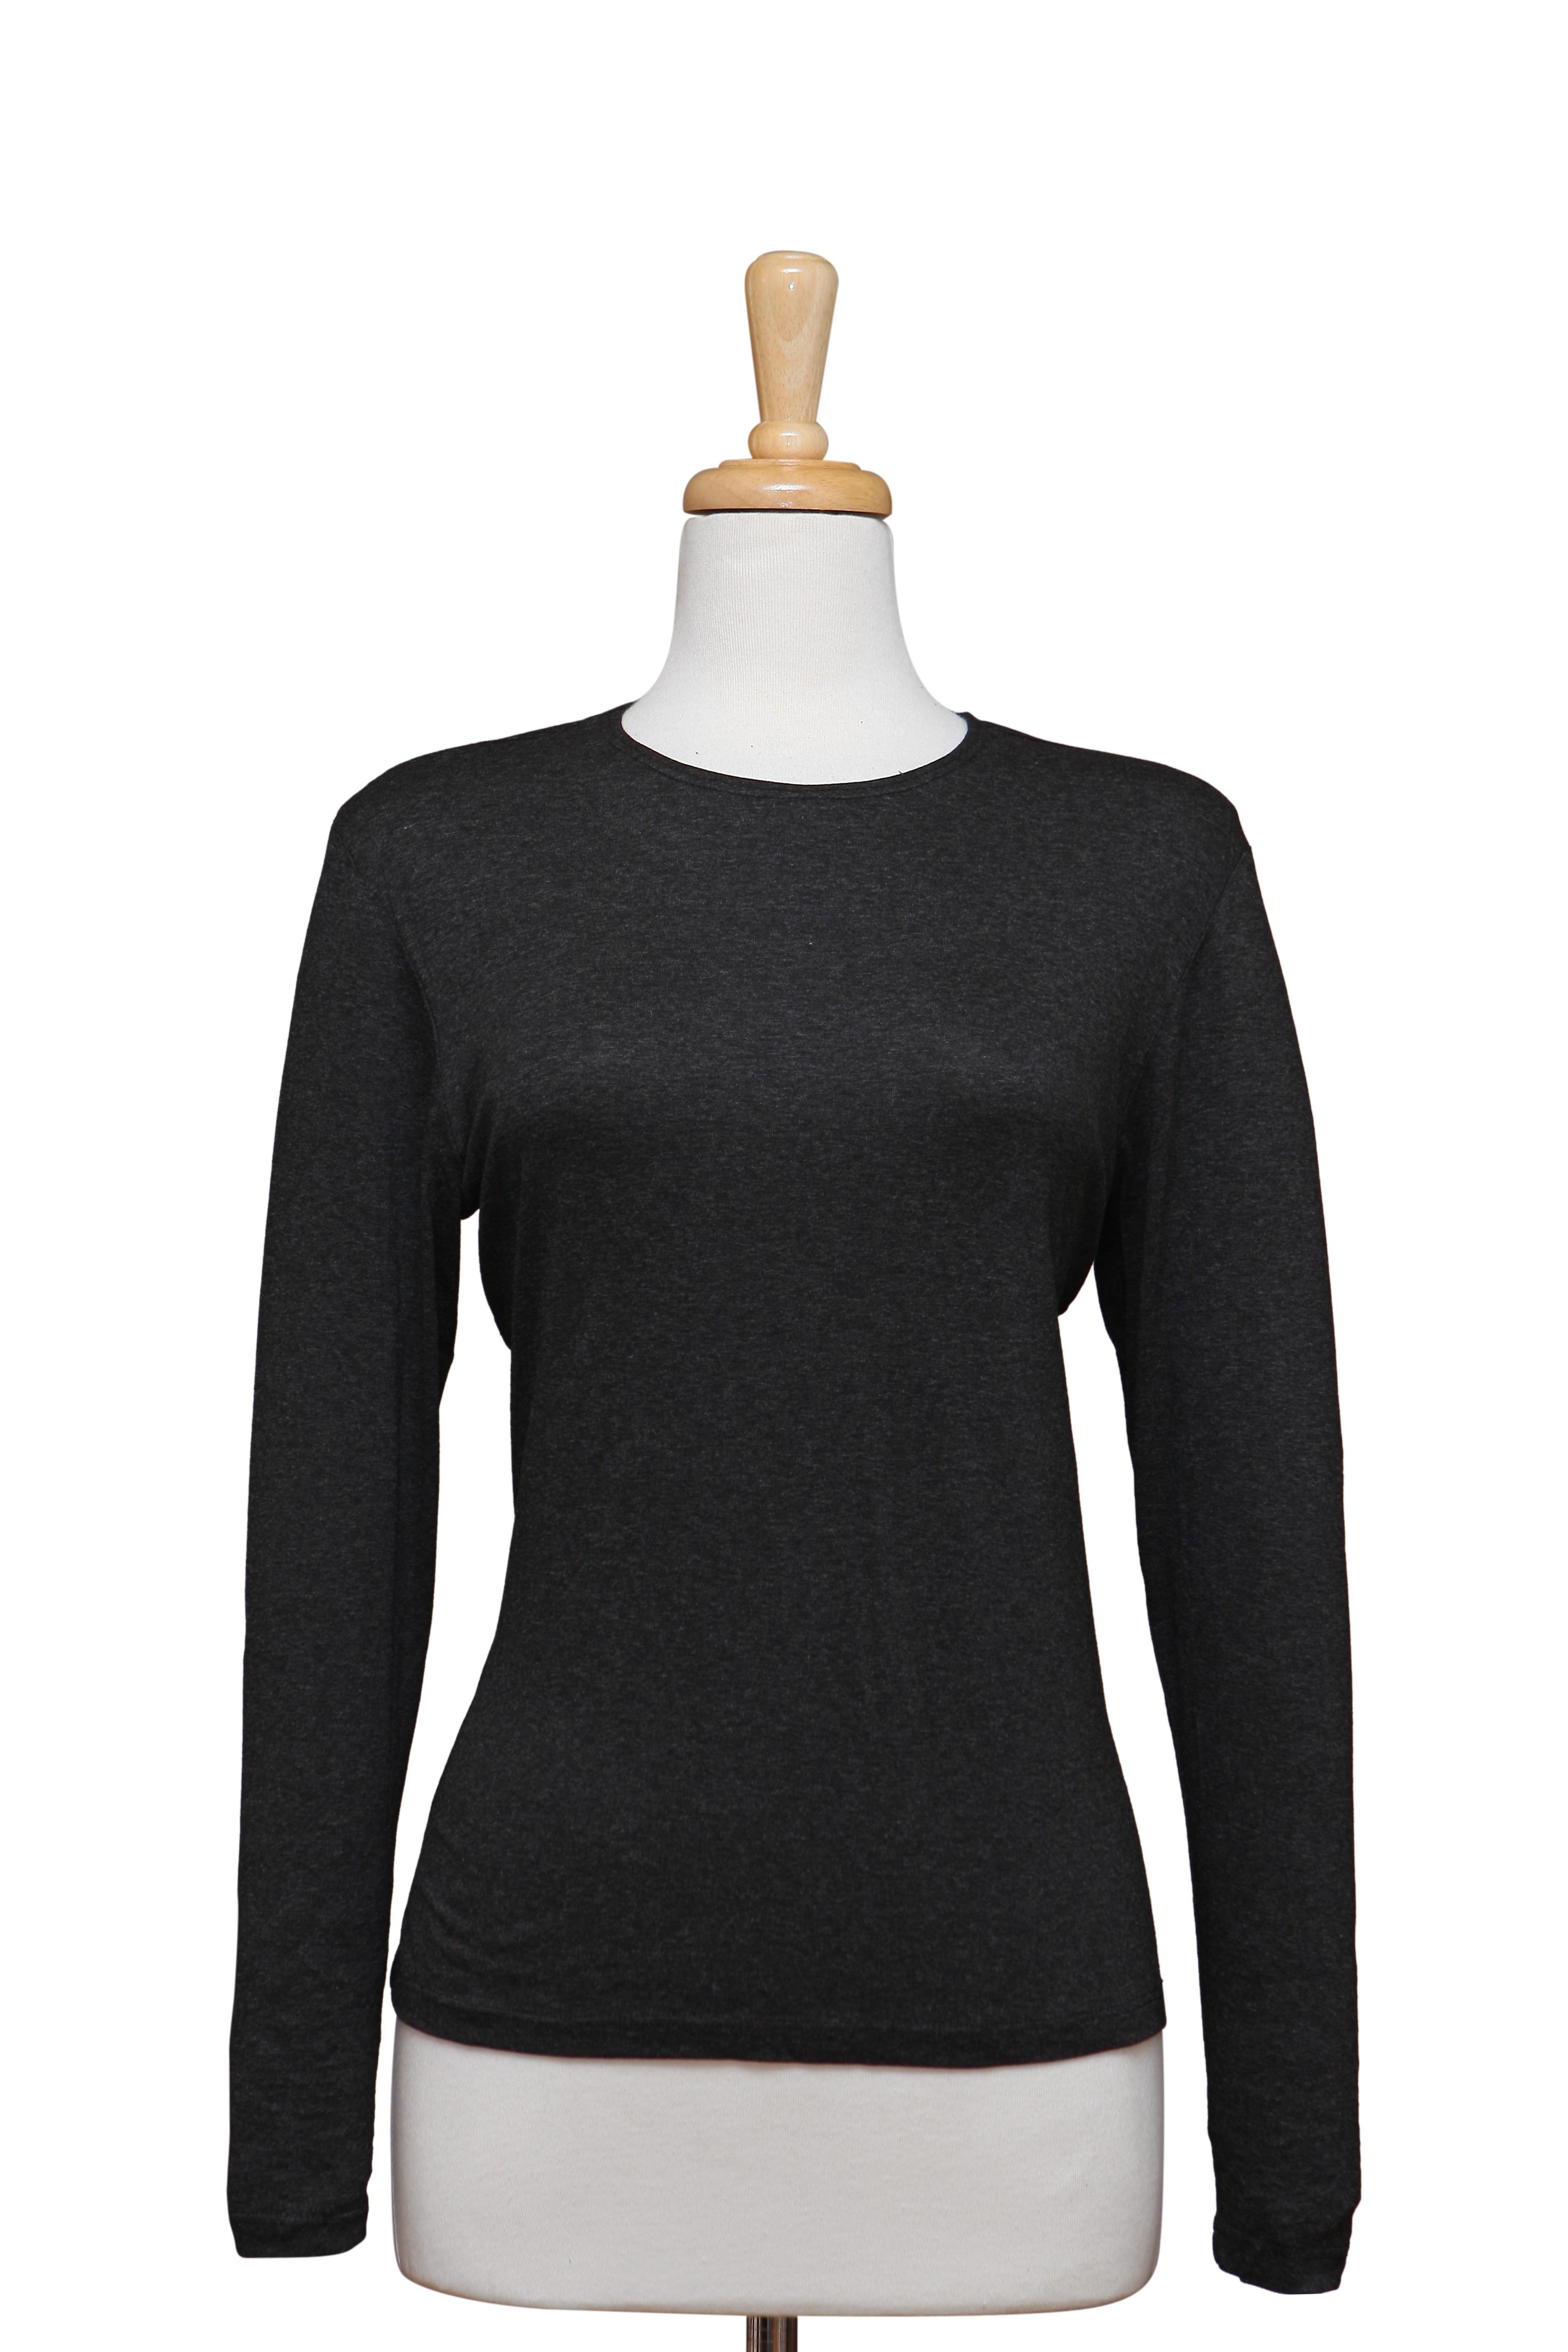 Charcoal Long Sleeve Cotton Top